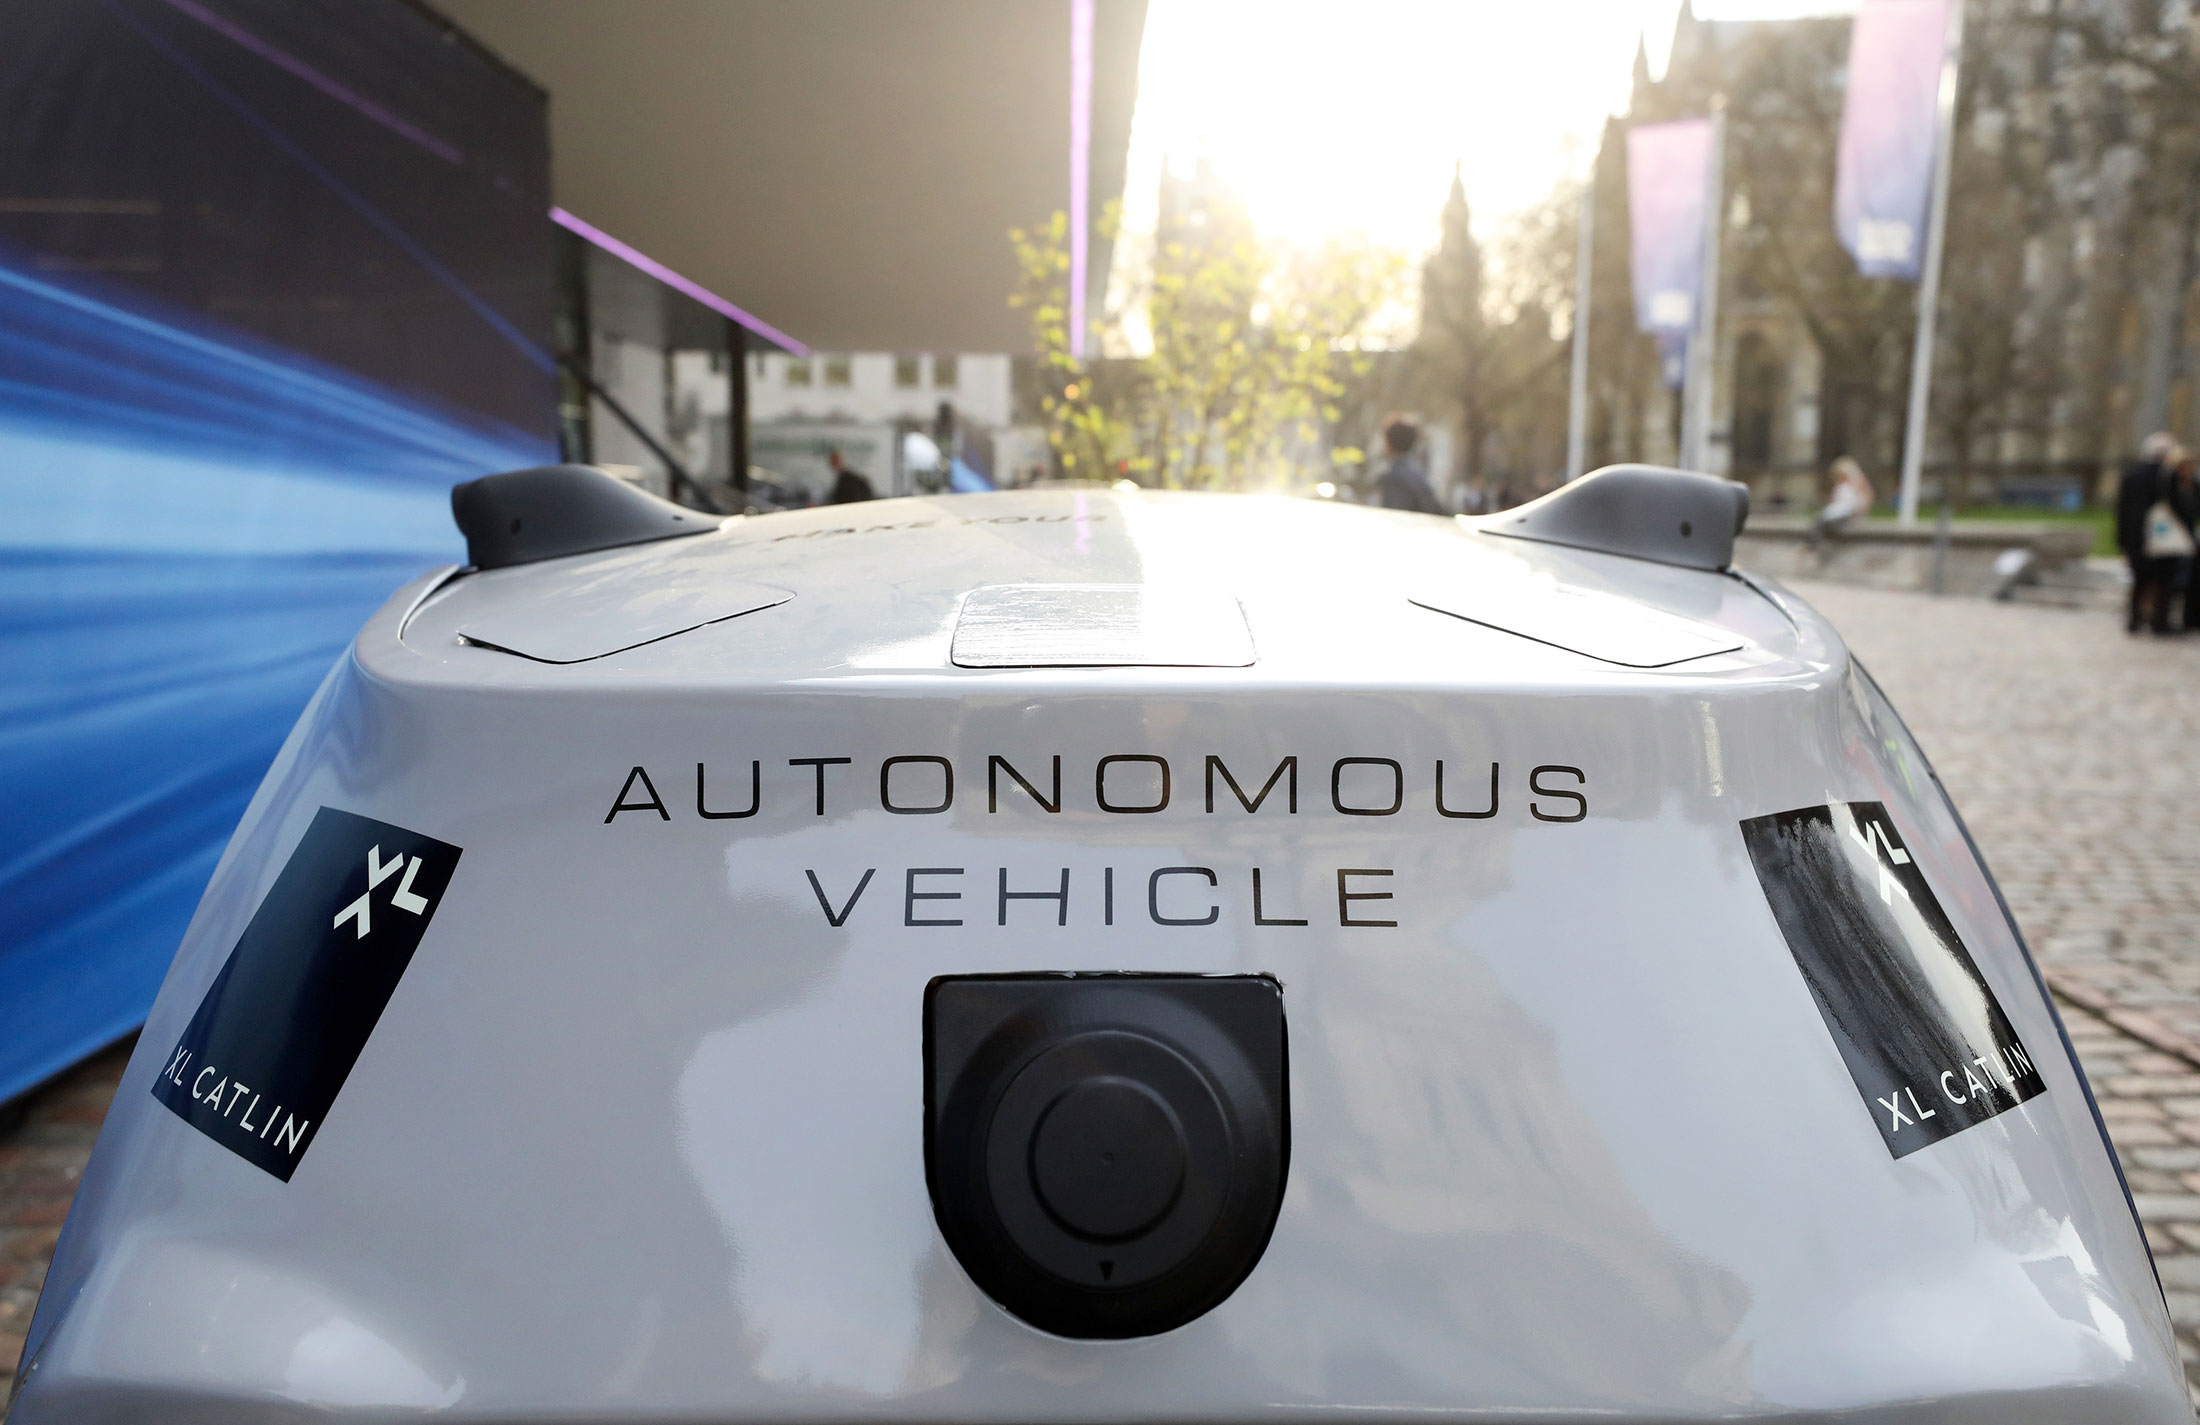 Sensors sit on the exterior of an autonomous vehicle developed by Oxbotica, using Selenium autonomous control software, outside the SMMT Connected 2017 conference on autonomous vehicles in London, U.K., on Thursday, March 30, 2017. In a worst case scenario, motor insurance premiums could fall by as much as 80 percent in some mature markets by 2040 because of new technologies, changes to mobility, regulation and companies being incentivized to roll out fleets of shared andautonomous vehicles.
